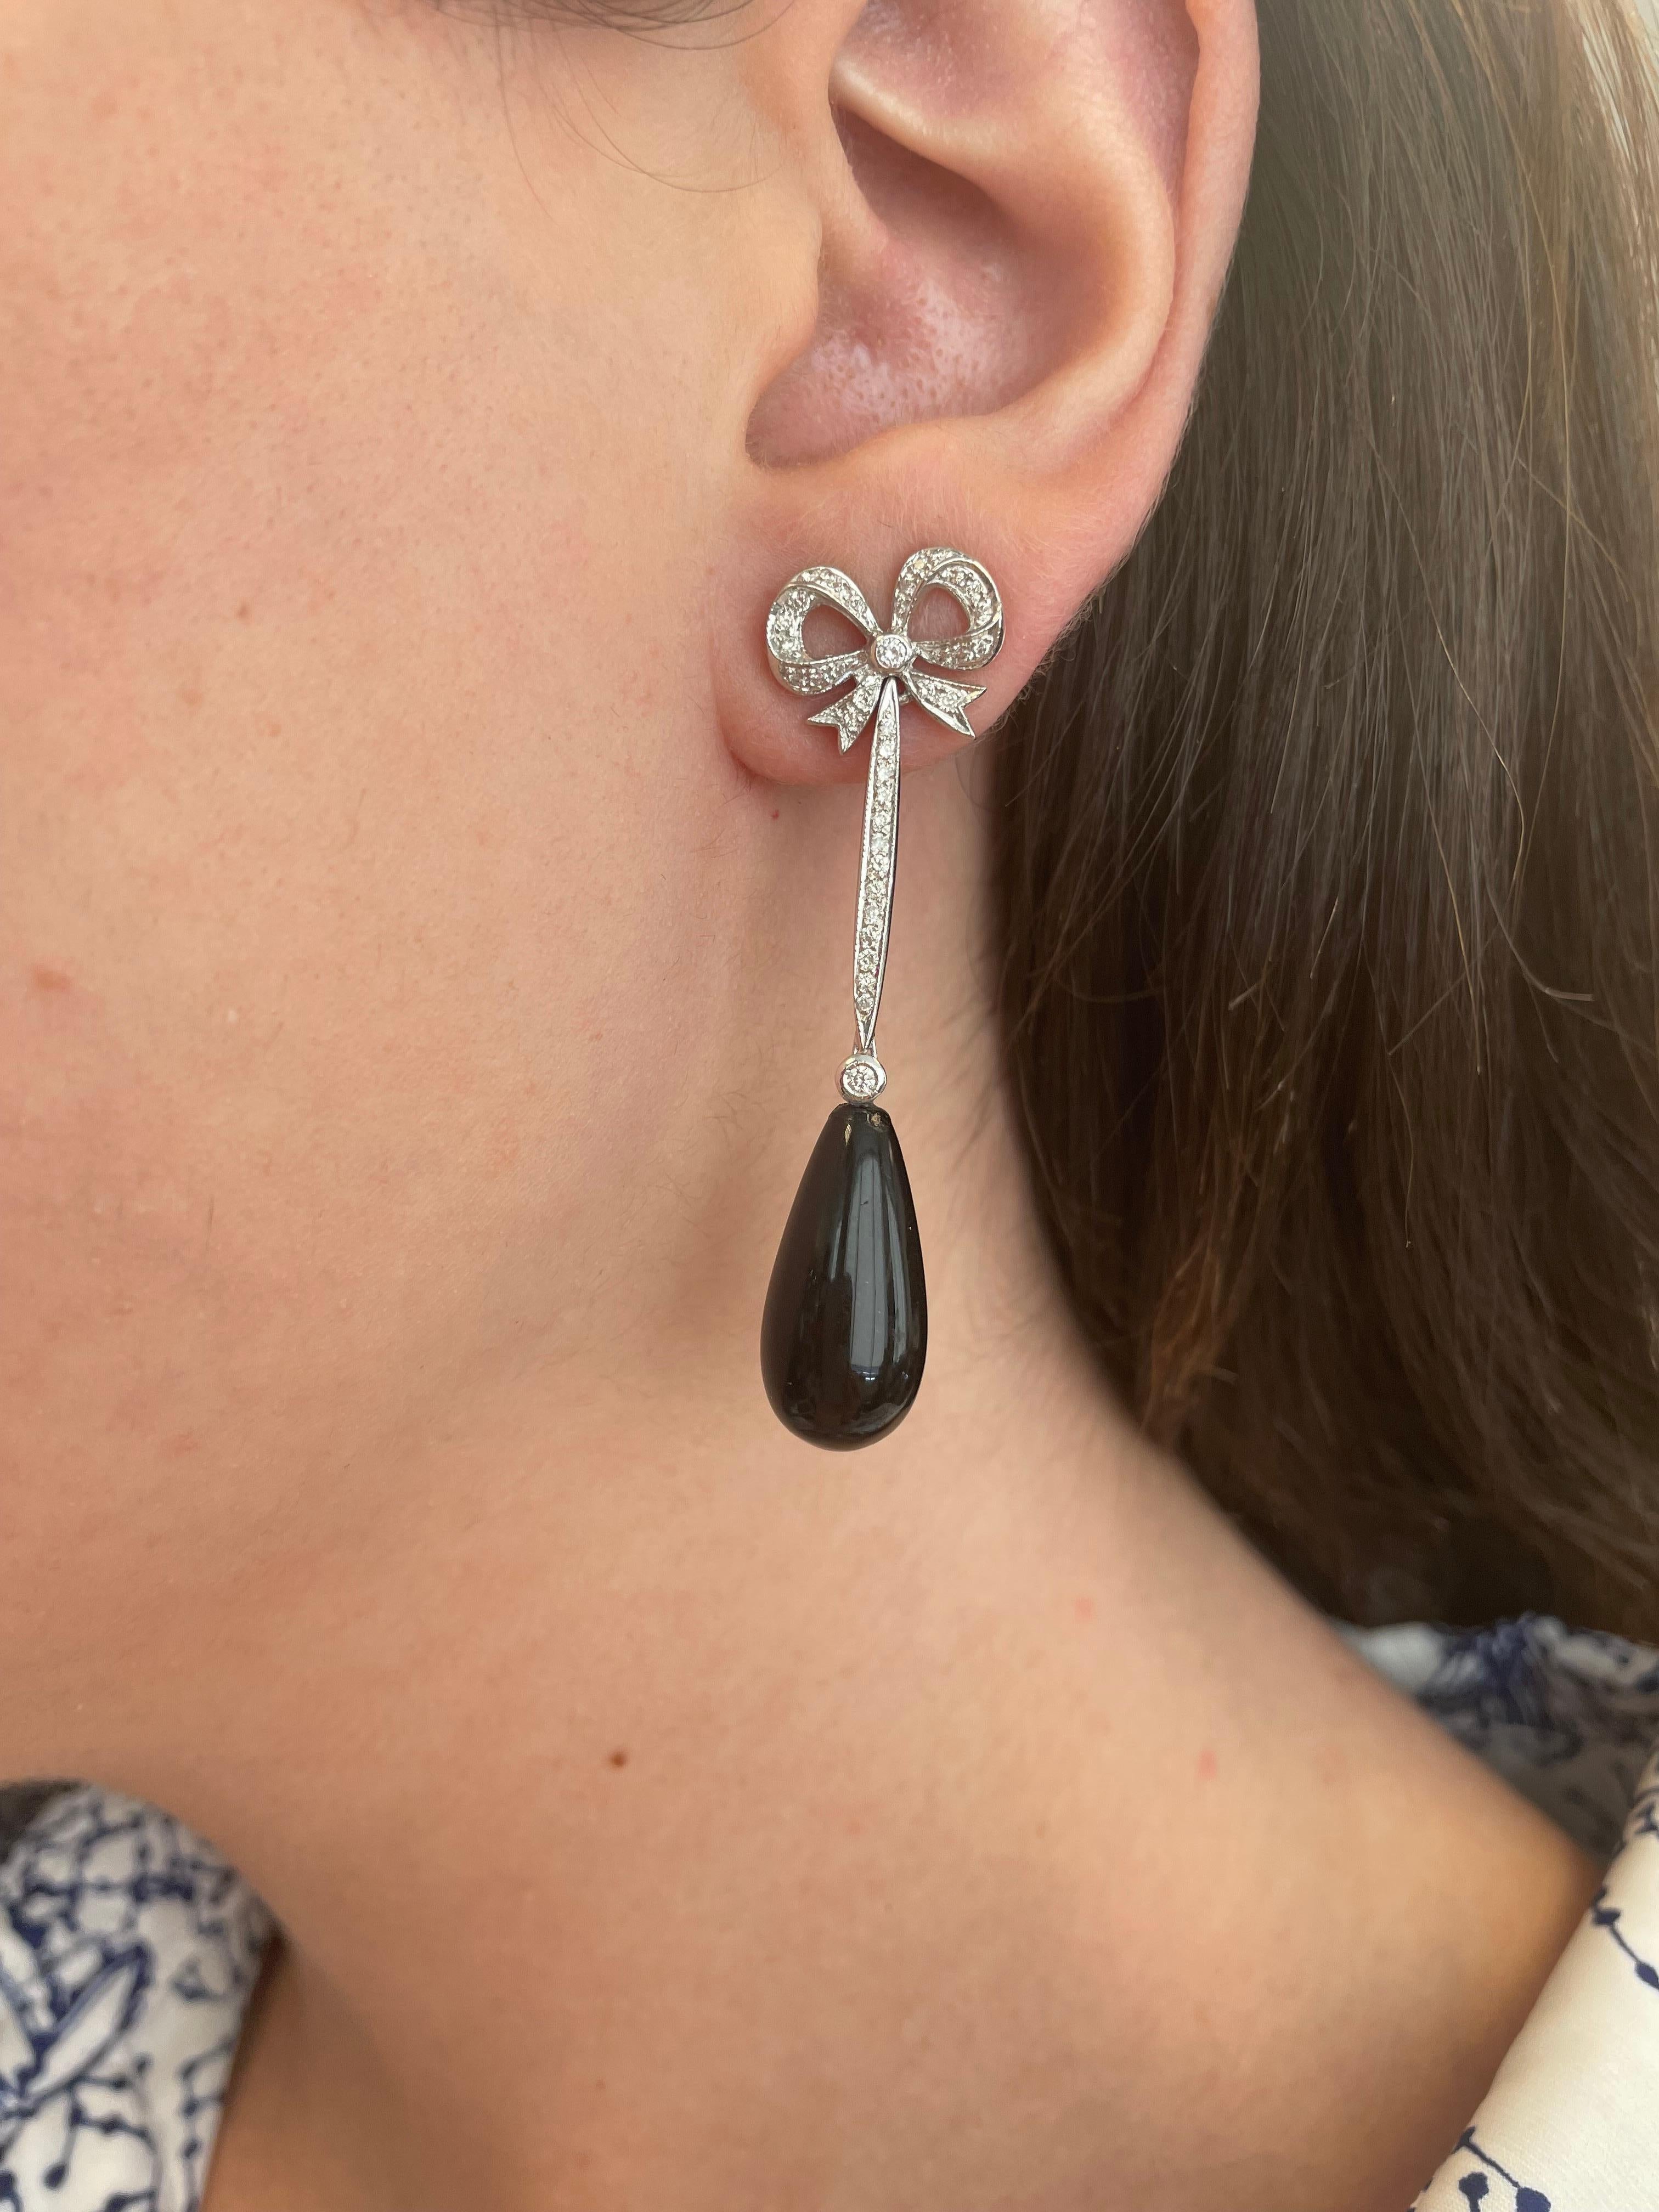 Lovely bow motif diamond bow with beaded onyx earrings.
78 round brilliant diamonds, 0.57 carats, approximately G/H color grade and SI clarity grade diamonds. 2 beaded onyx, 18-karat white gold.
Accommodated with an up to date appraisal by a GIA